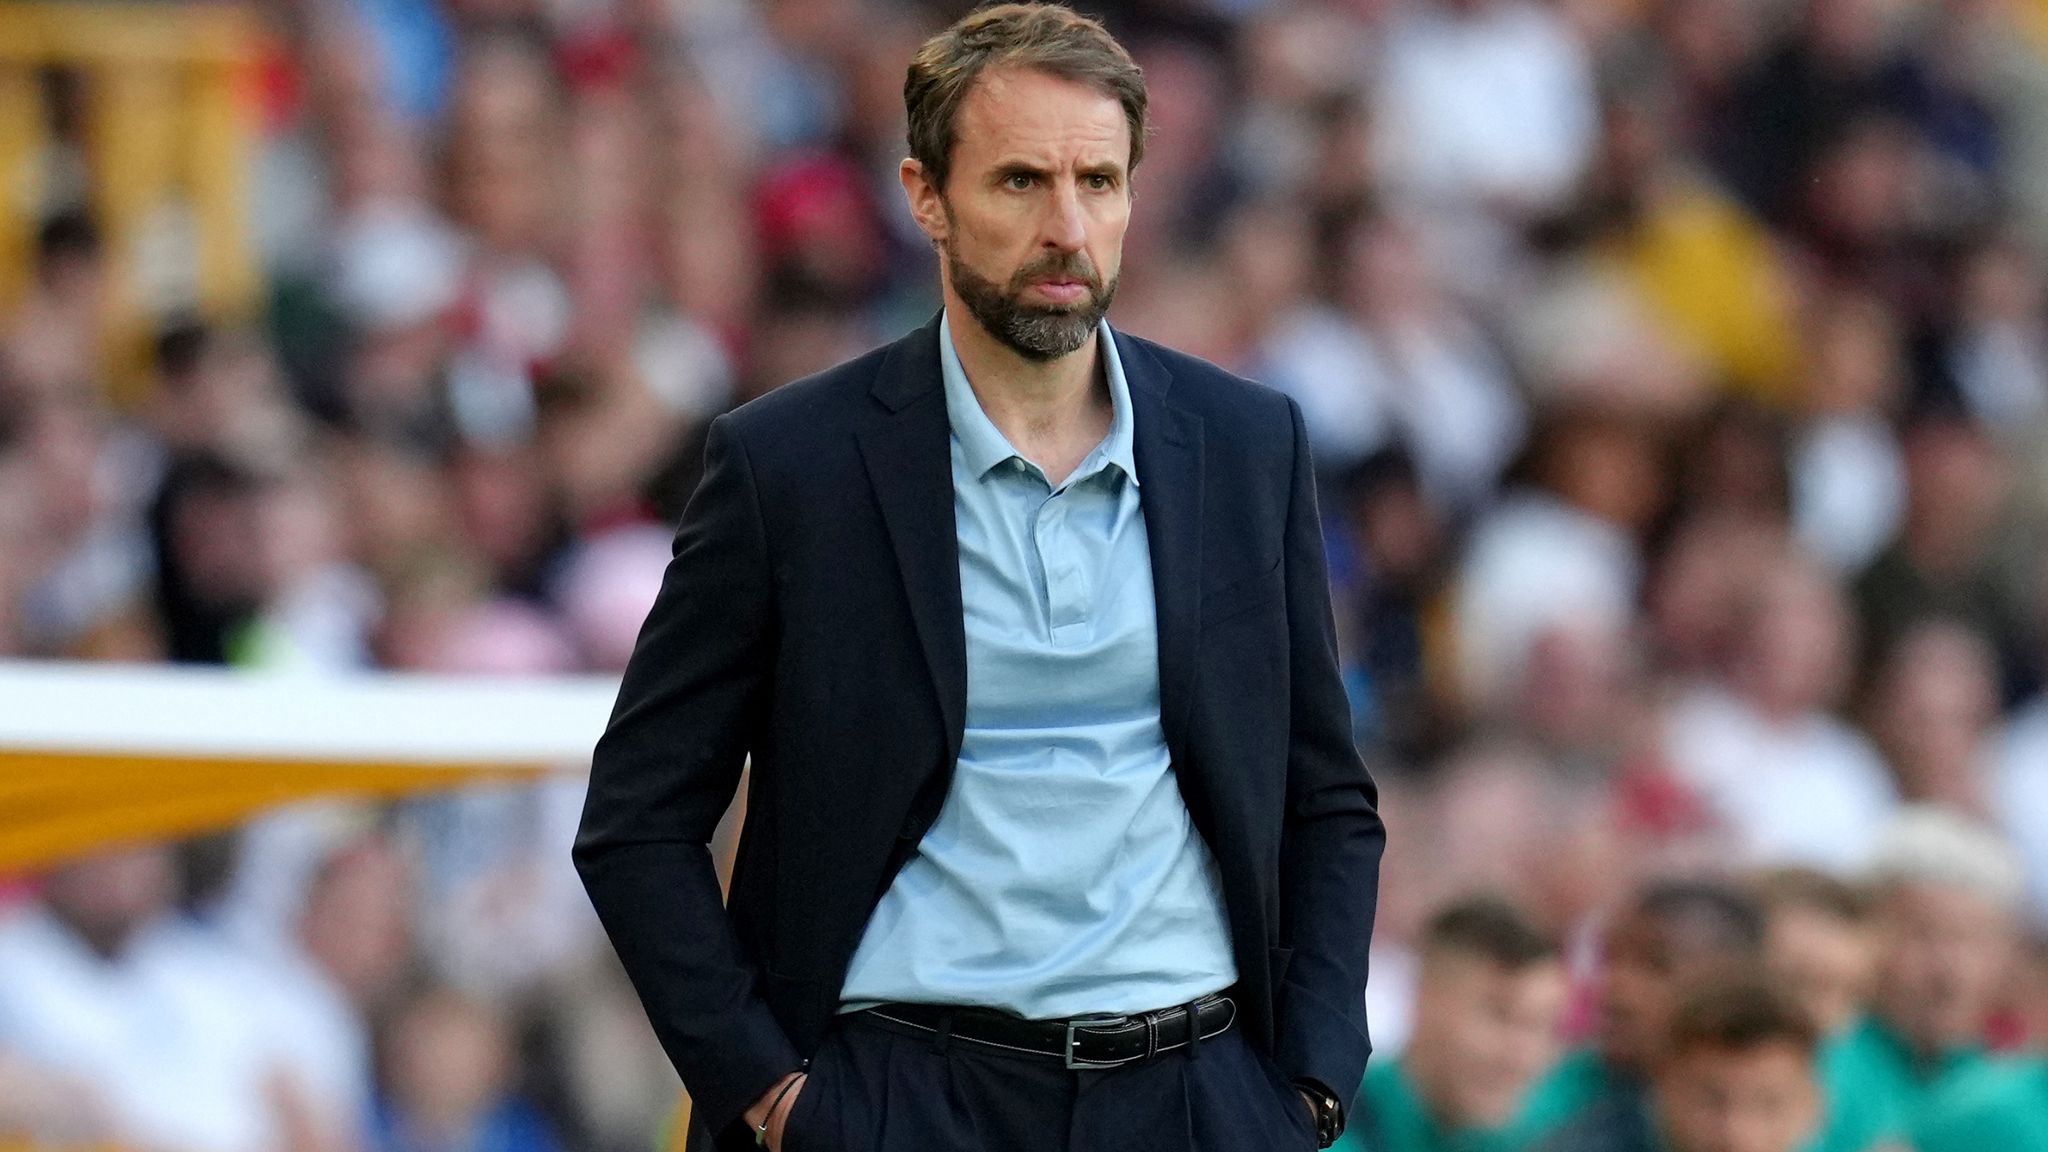 FIFA World Cup: Gareth Southgate on his way out, Steven Gerrard tipped to become new England manager even before Qatar World Cup, Check Details